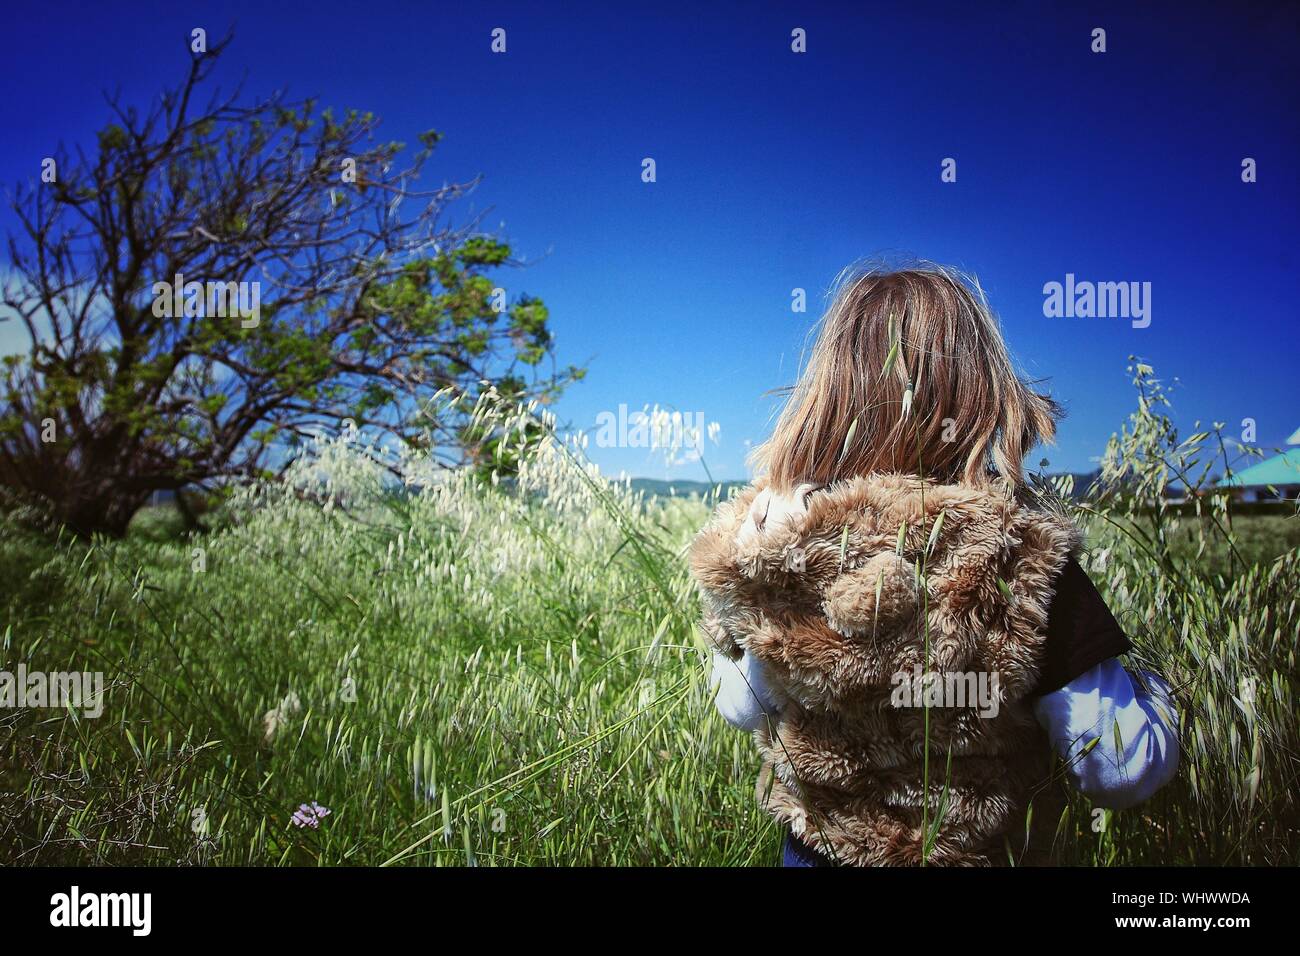 Rear View Of Girl Standing Amidst Plant Field Stock Photo